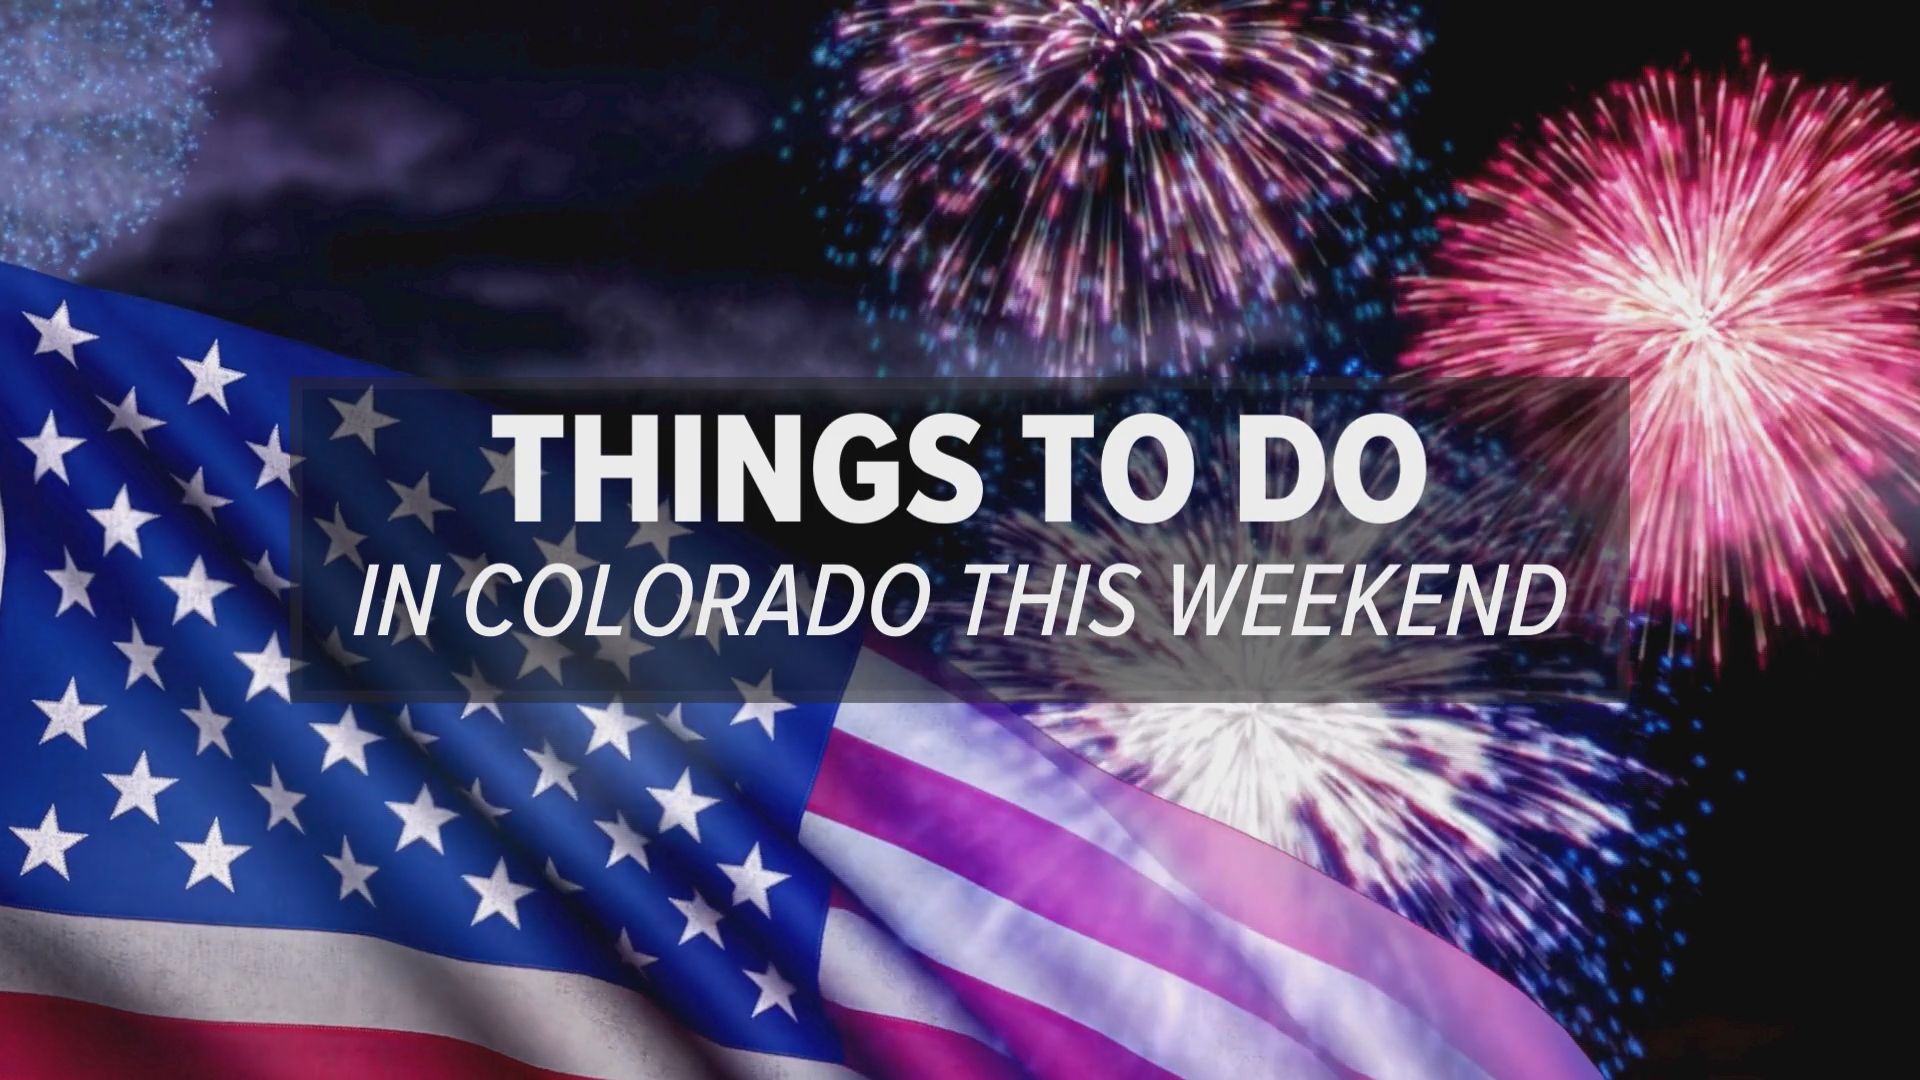 Colorado celebrates Independence Day with fireworks, lasers and drones, the Cherry Creek Arts Festival, and Fan Expo Denver.